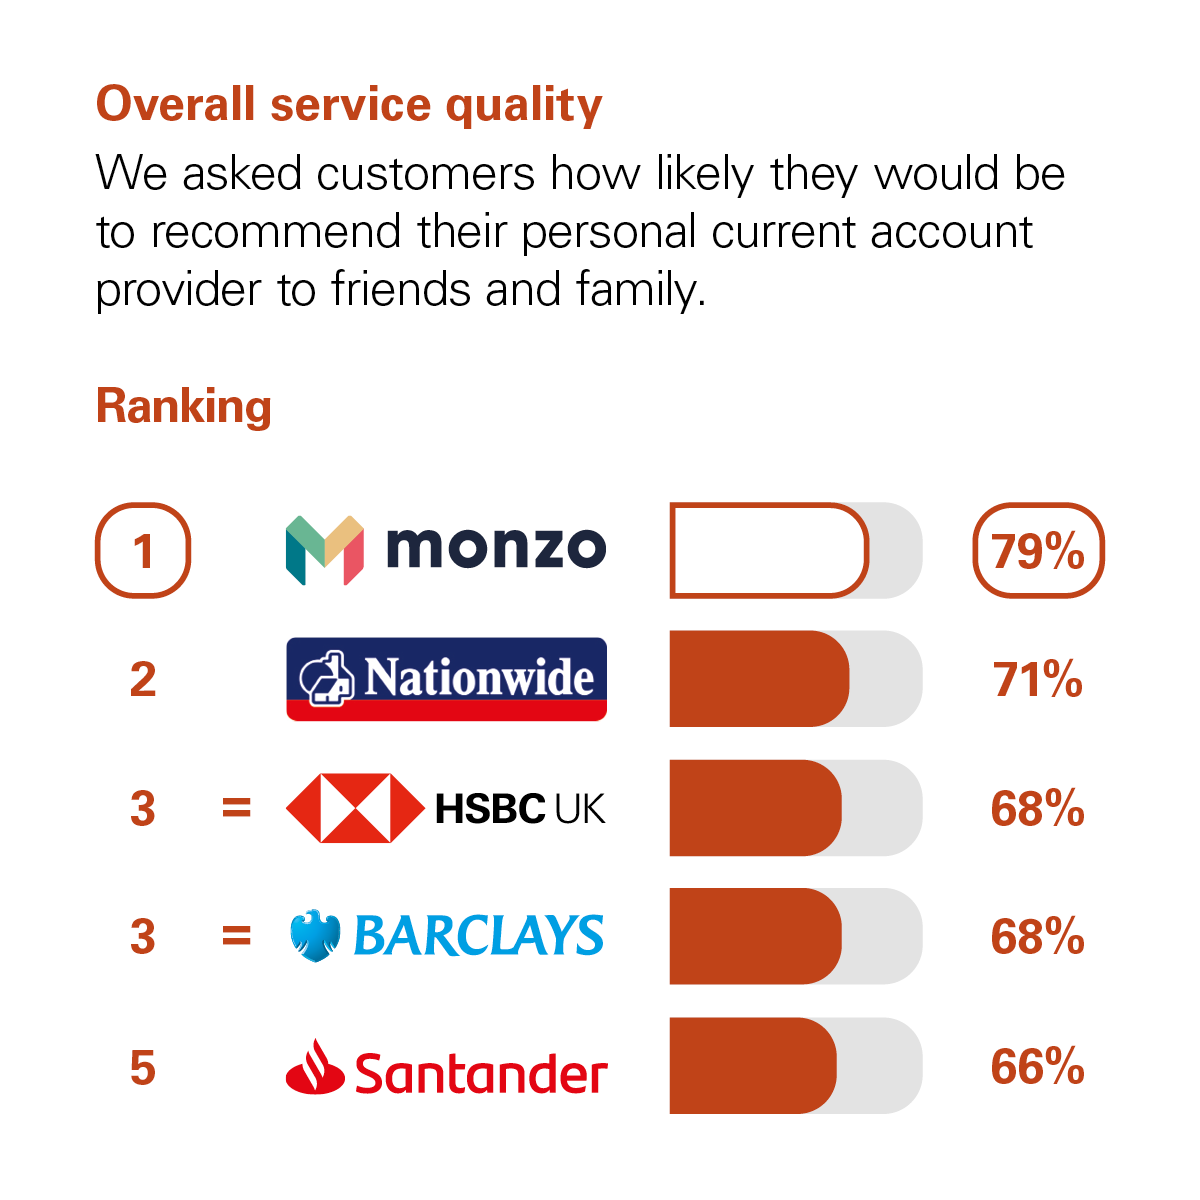 Graph showing the results of the CMA scoring of UK banks in the Overall Service Quality category. The CMA asked customers how likely they would be to recommend their personal current account provider to friends and family. The rankings with percentage scores are: 1st Monzo with 79%. 2nd Nationwide with 71%. Joint 3rd are HSBC UK and Barclays with 68%. 5th Santander with 66%. Joint 5th is HSBC UK with 64%.